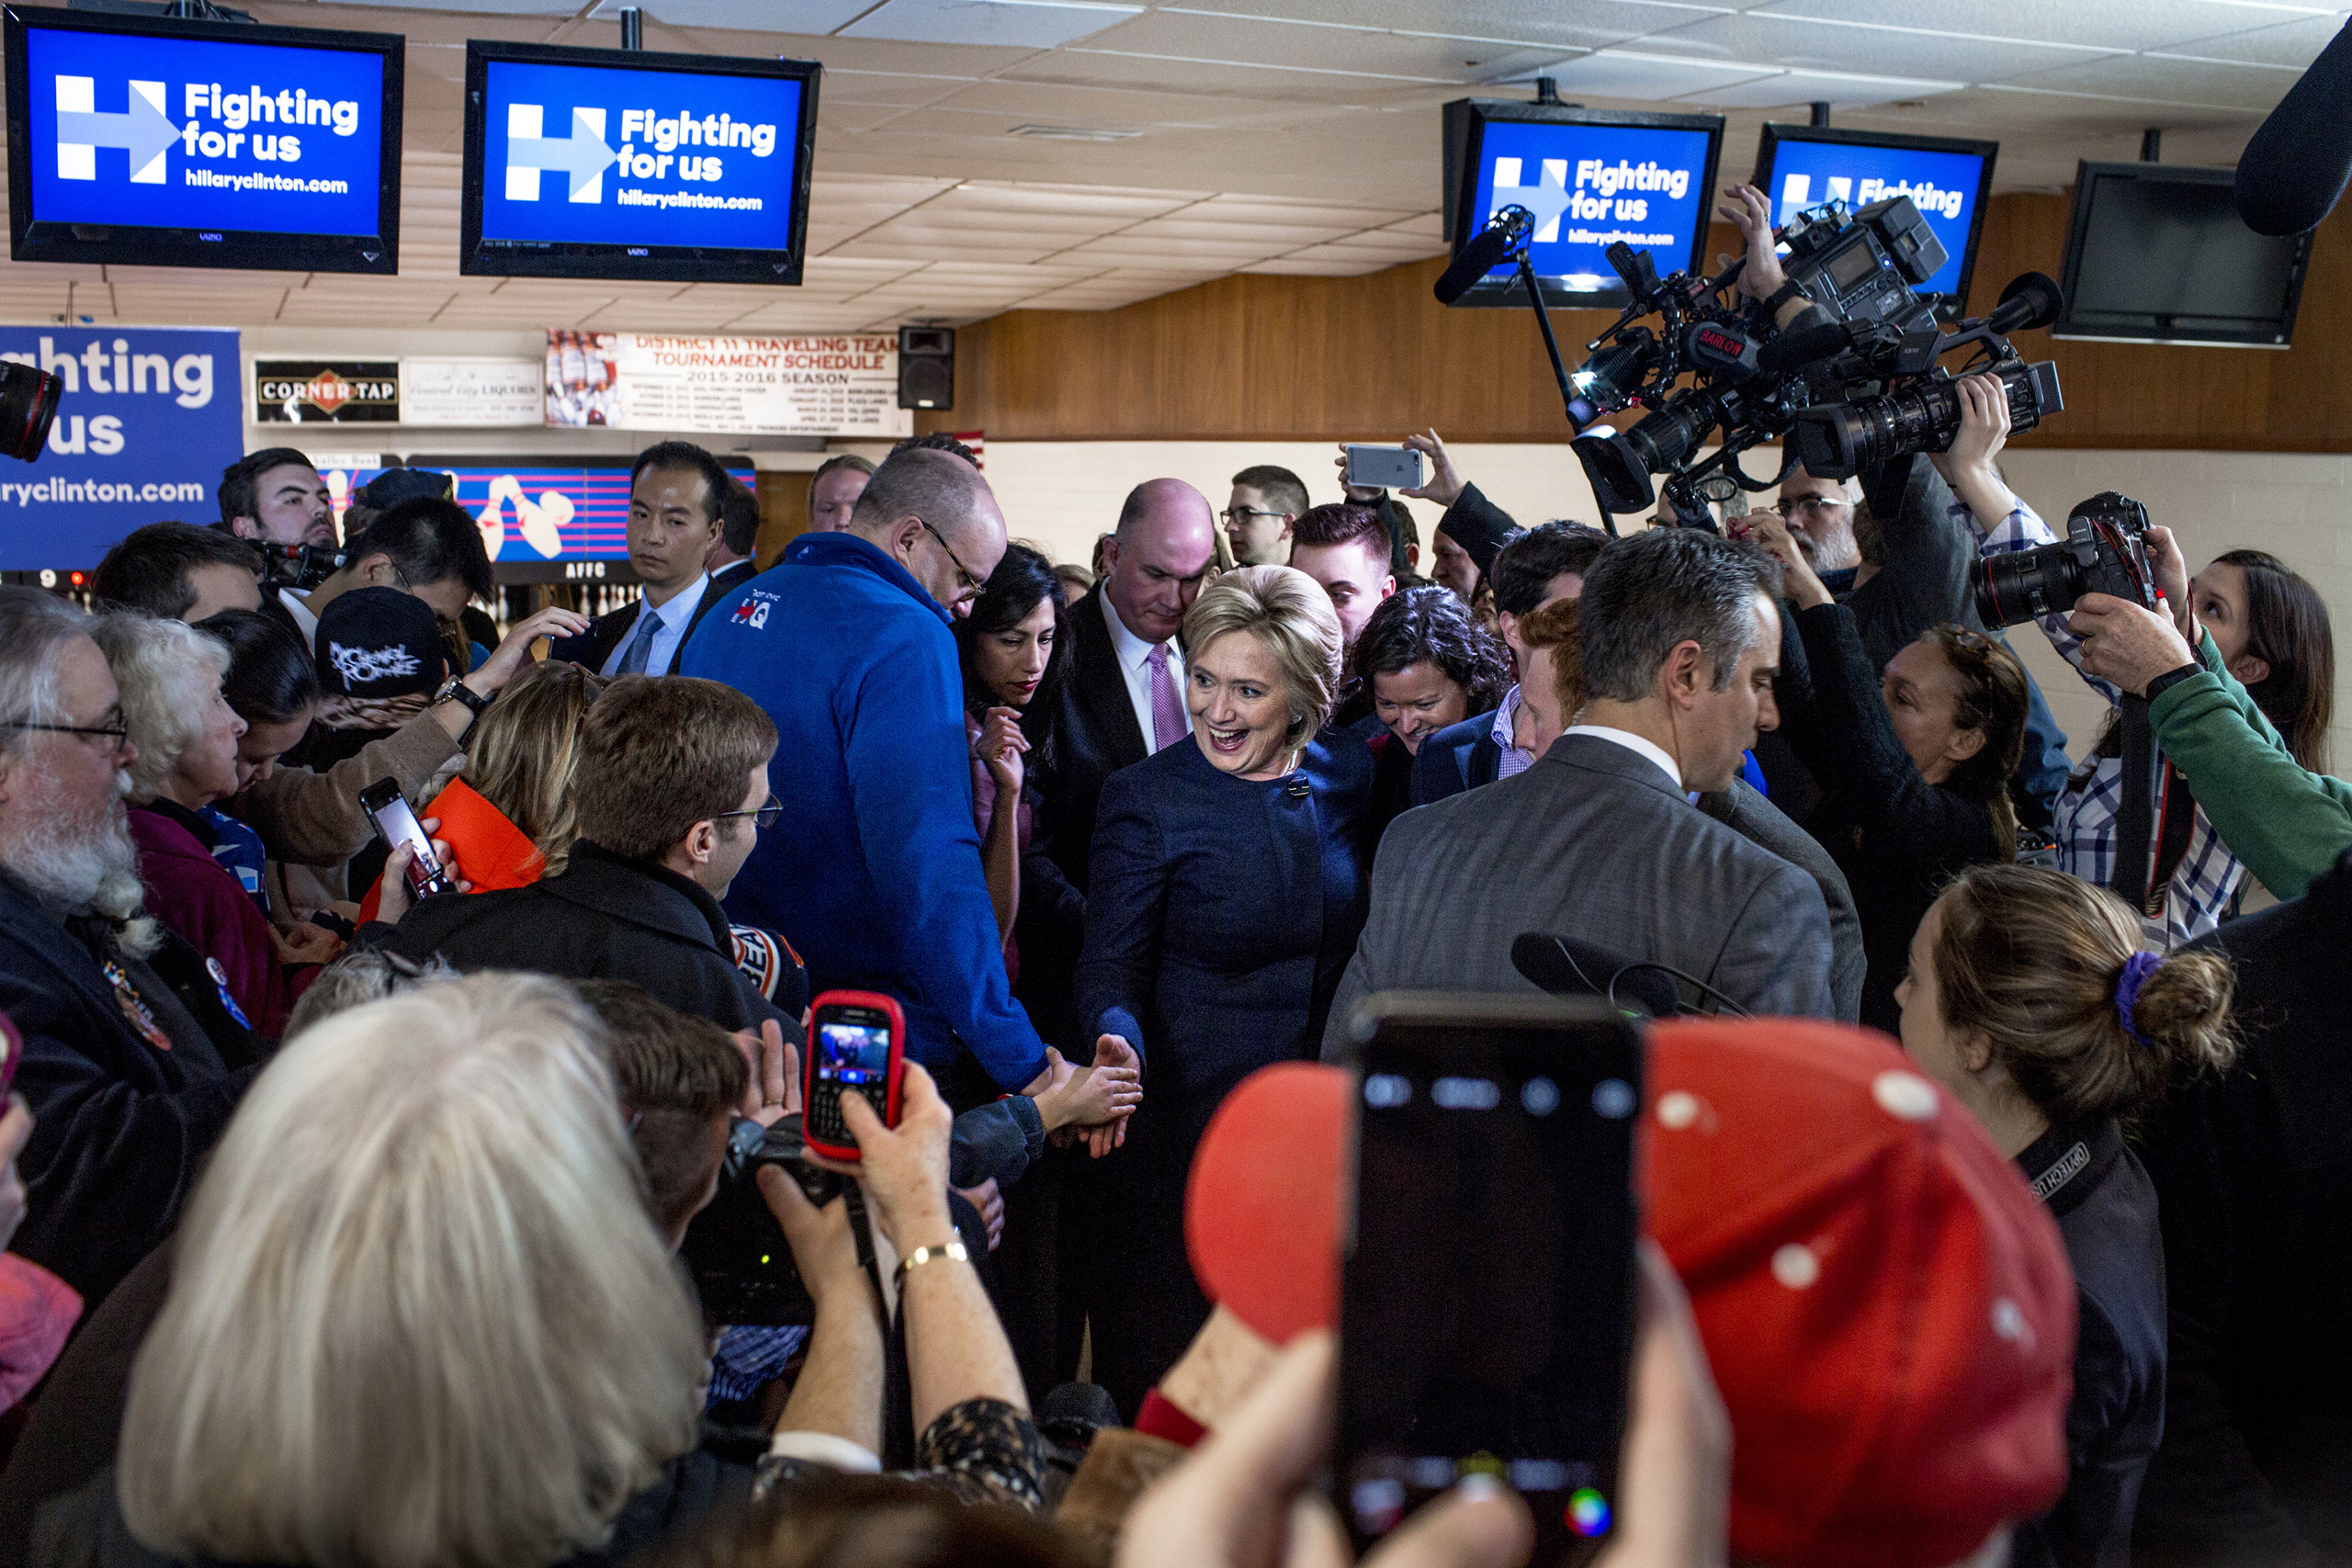 Hillary Clinton spoke to supporters at a campaign rally at the Adel Family Fun Center in Adel, Iowa, on Wednesday morning, January 27, 2016.